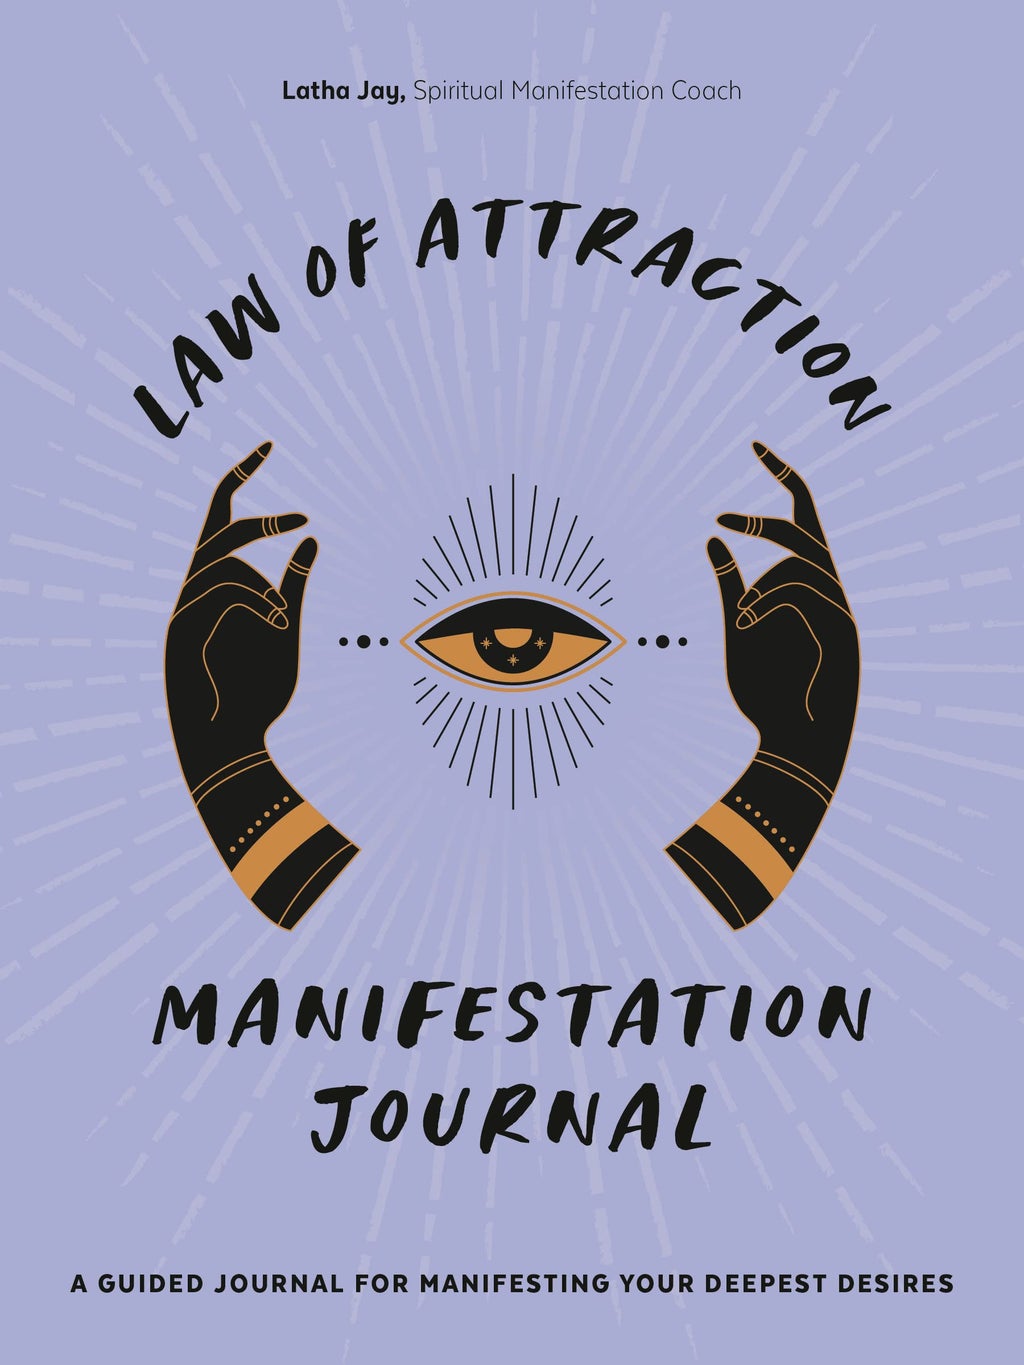 Law Of Attraction, Guided Journals